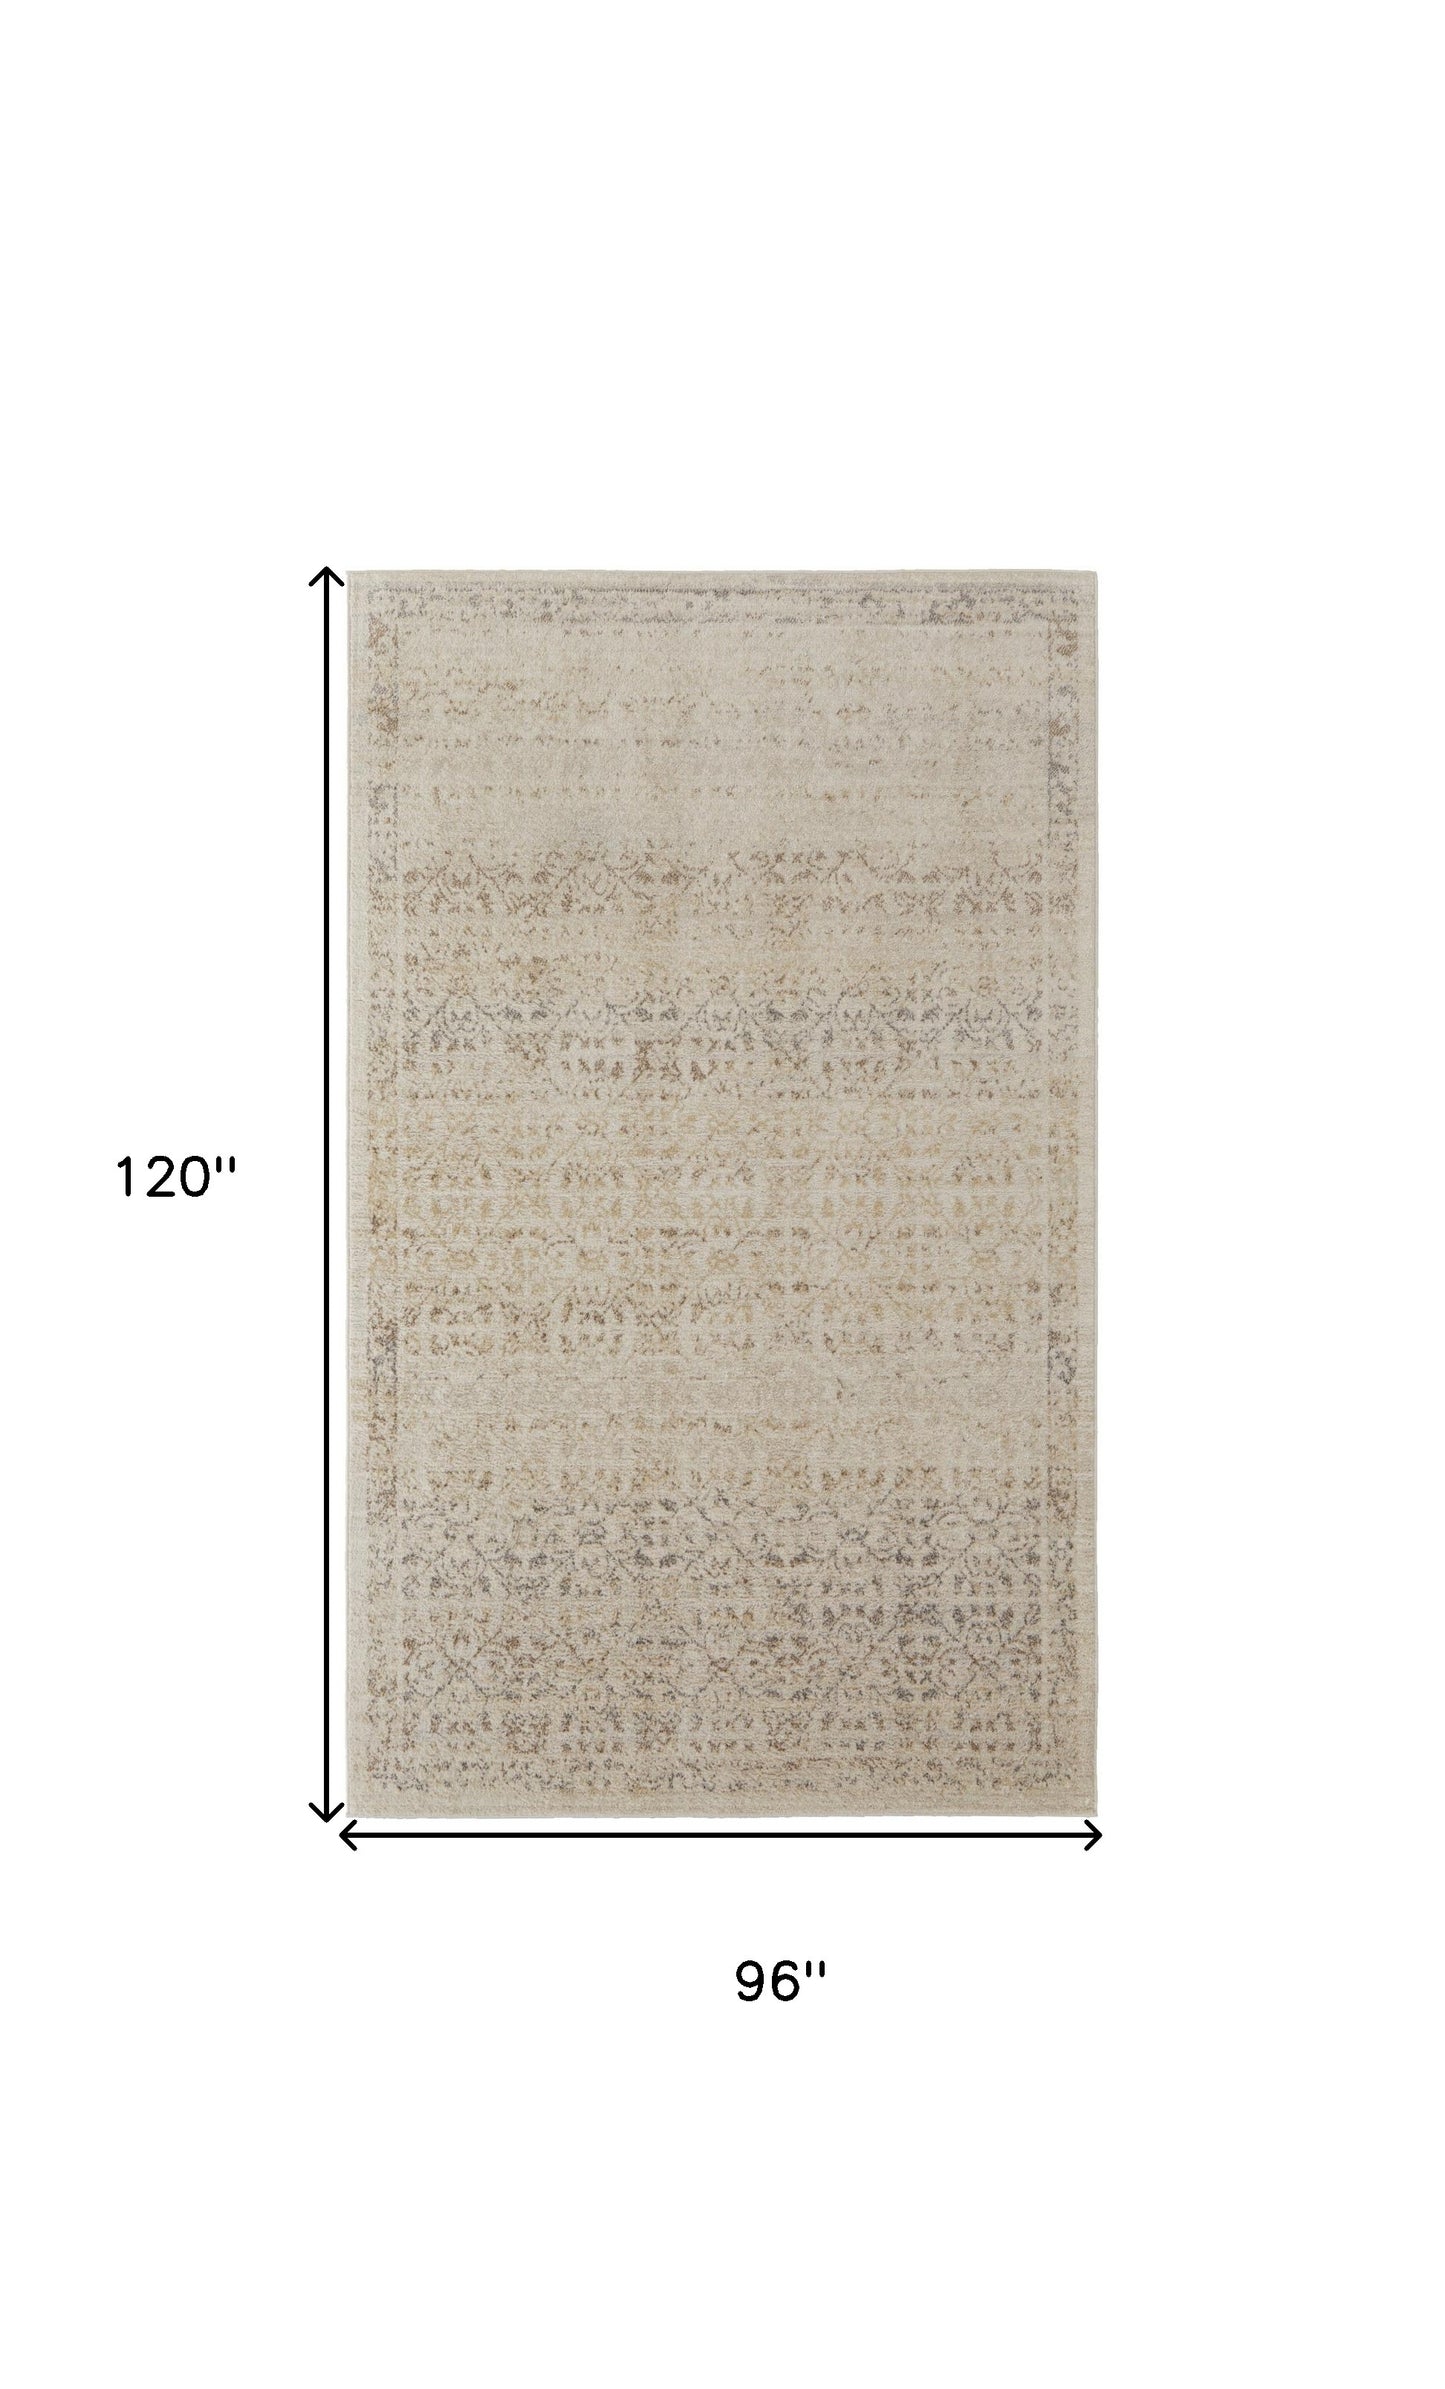 8' X 10' Ivory Tan And Gray Abstract Power Loom Distressed Area Rug